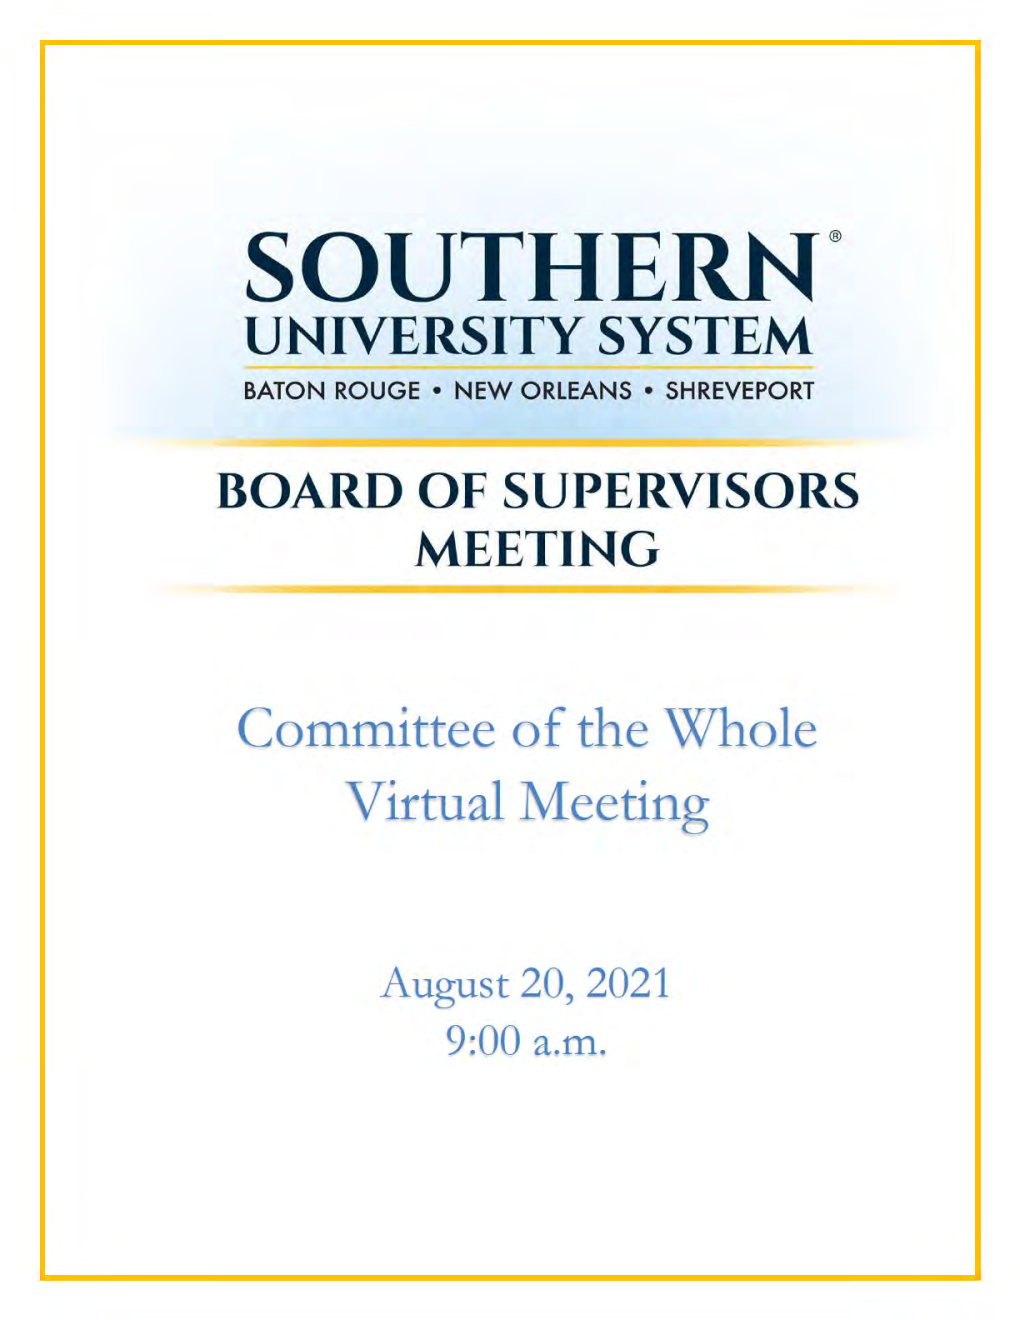 SOUTHERN UNIVERSITY BOARD of SUPERVISORS MEETING Committee of the Whole – Virtual Meeting Friday, August 20, 2021 9:00 A.M